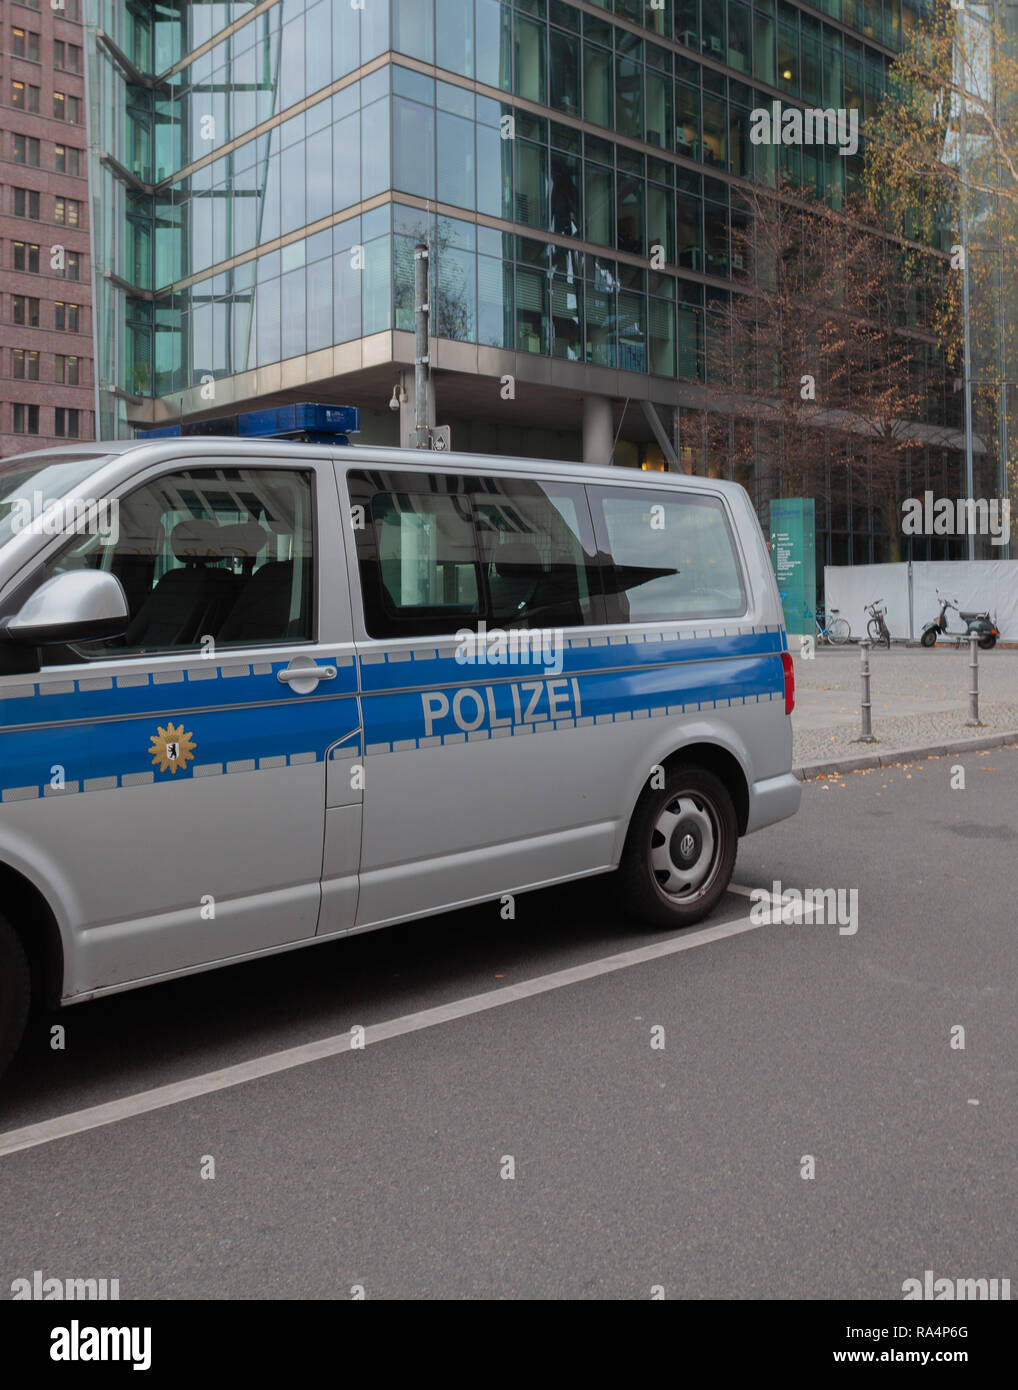 A policecar at the streets of Berlin. With the new Blue and Silver design. Stock Photo